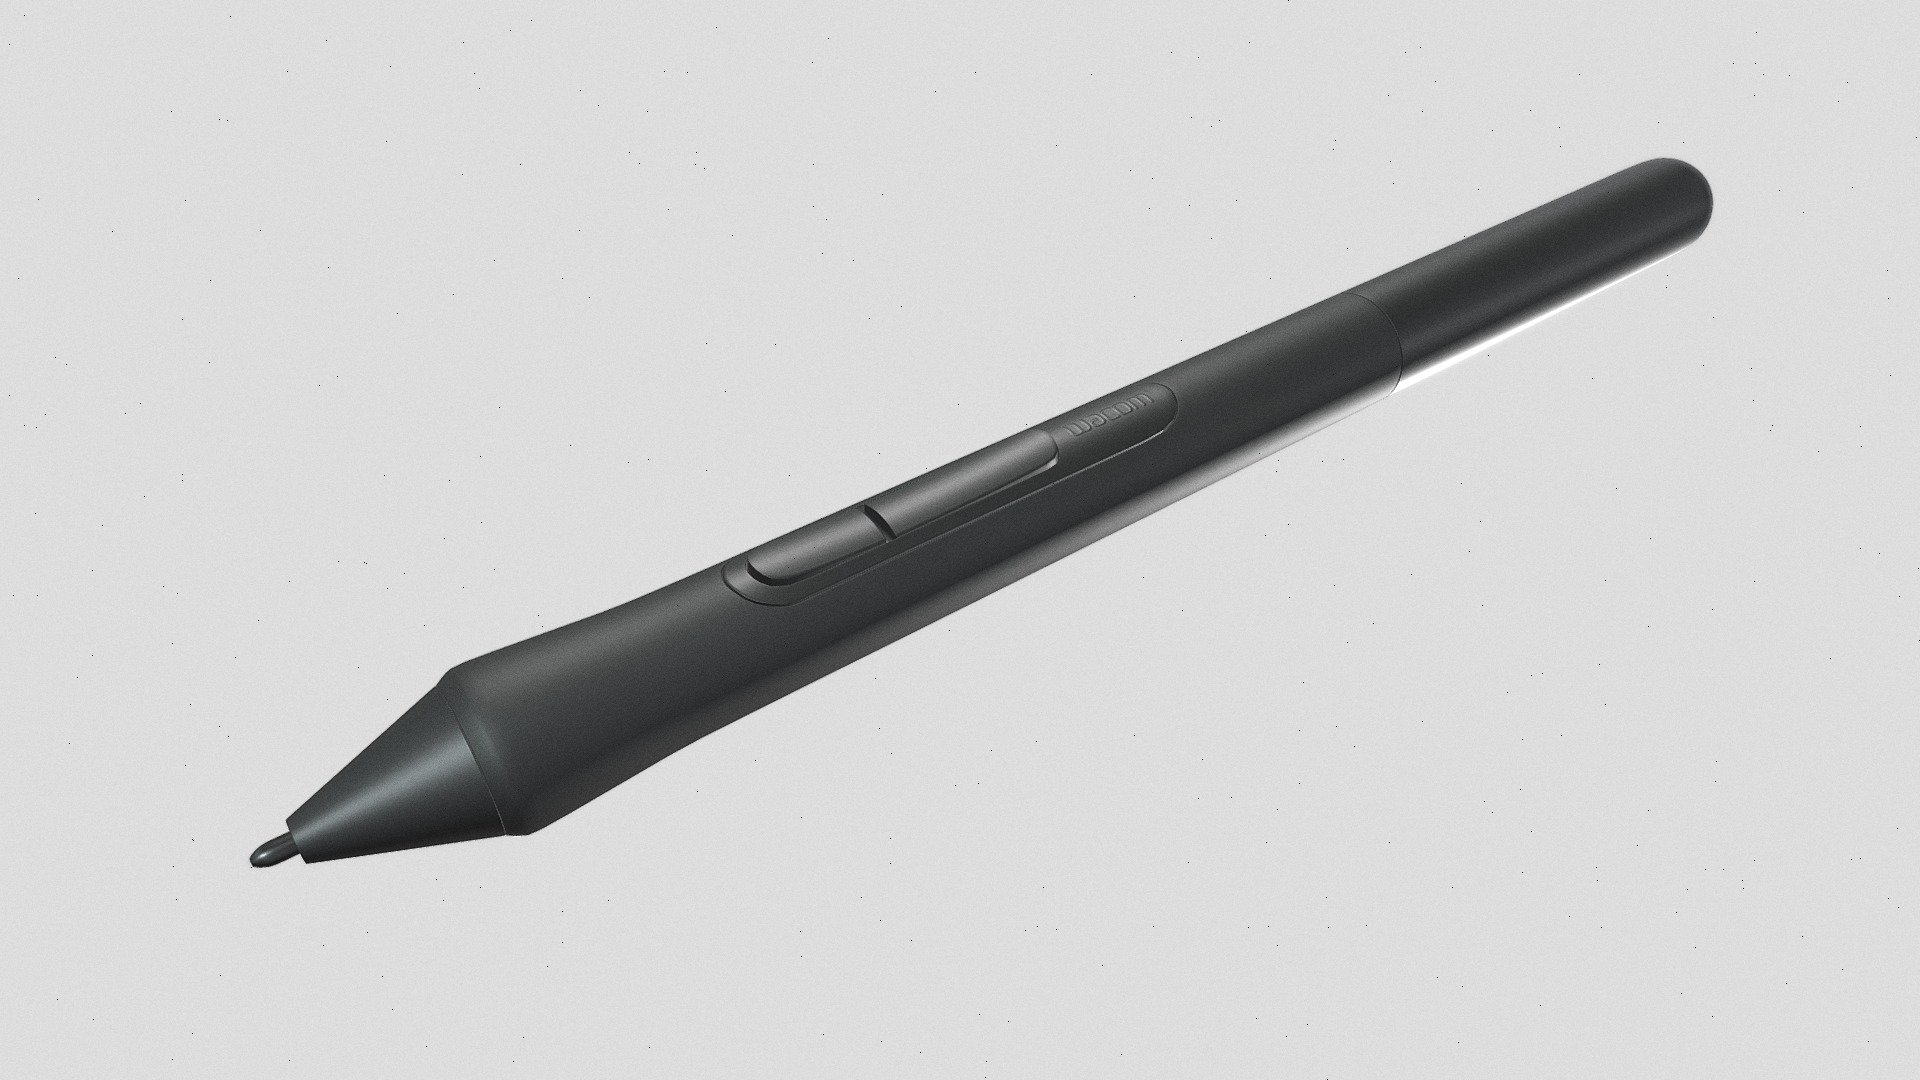 A recreation of the Wacom Intuos S pen, modeled using Maya 2022 and rendered in Vray 3d model